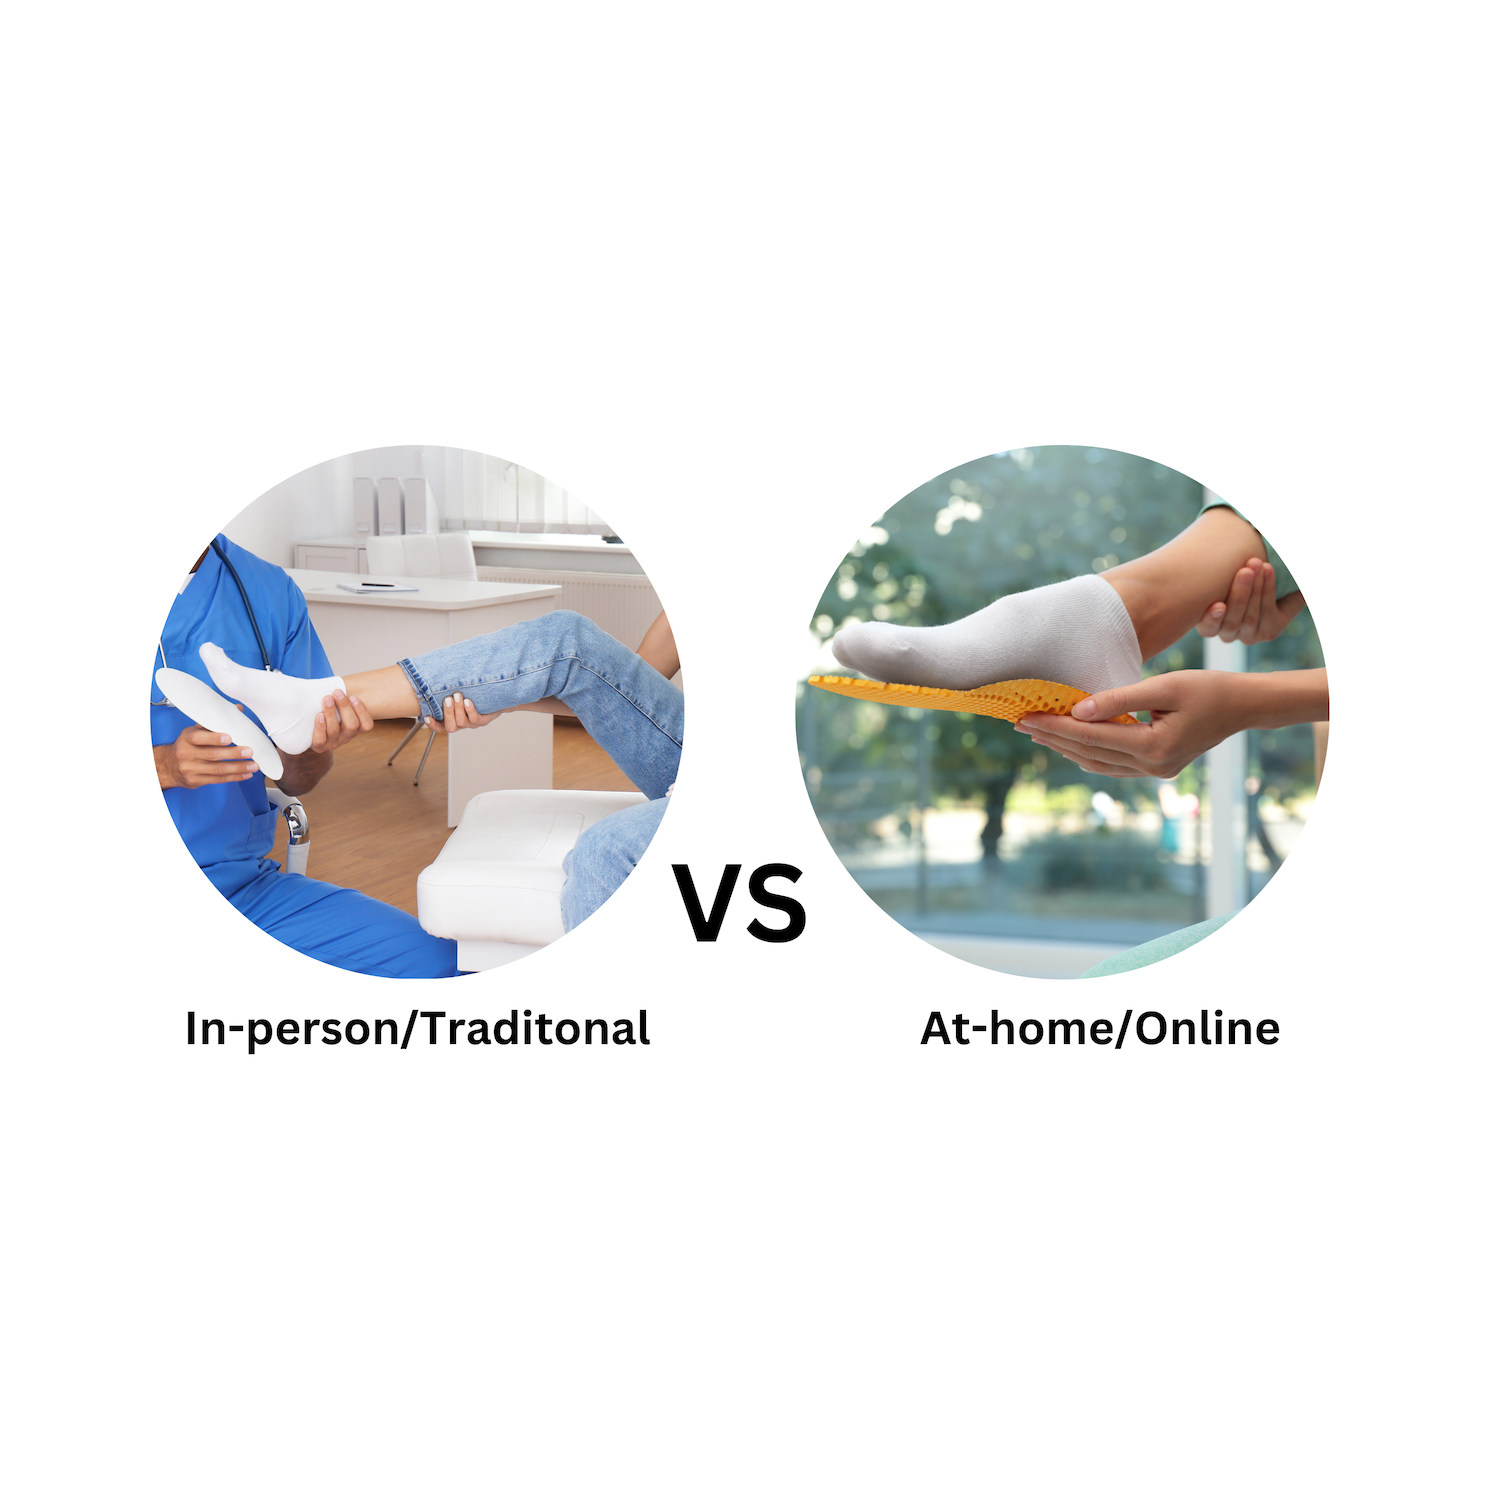 A podiatrist holding orthotics to a foot vs a woman holding orthotics to here foot to discuss Where to buy orthotics near me traditional vs online